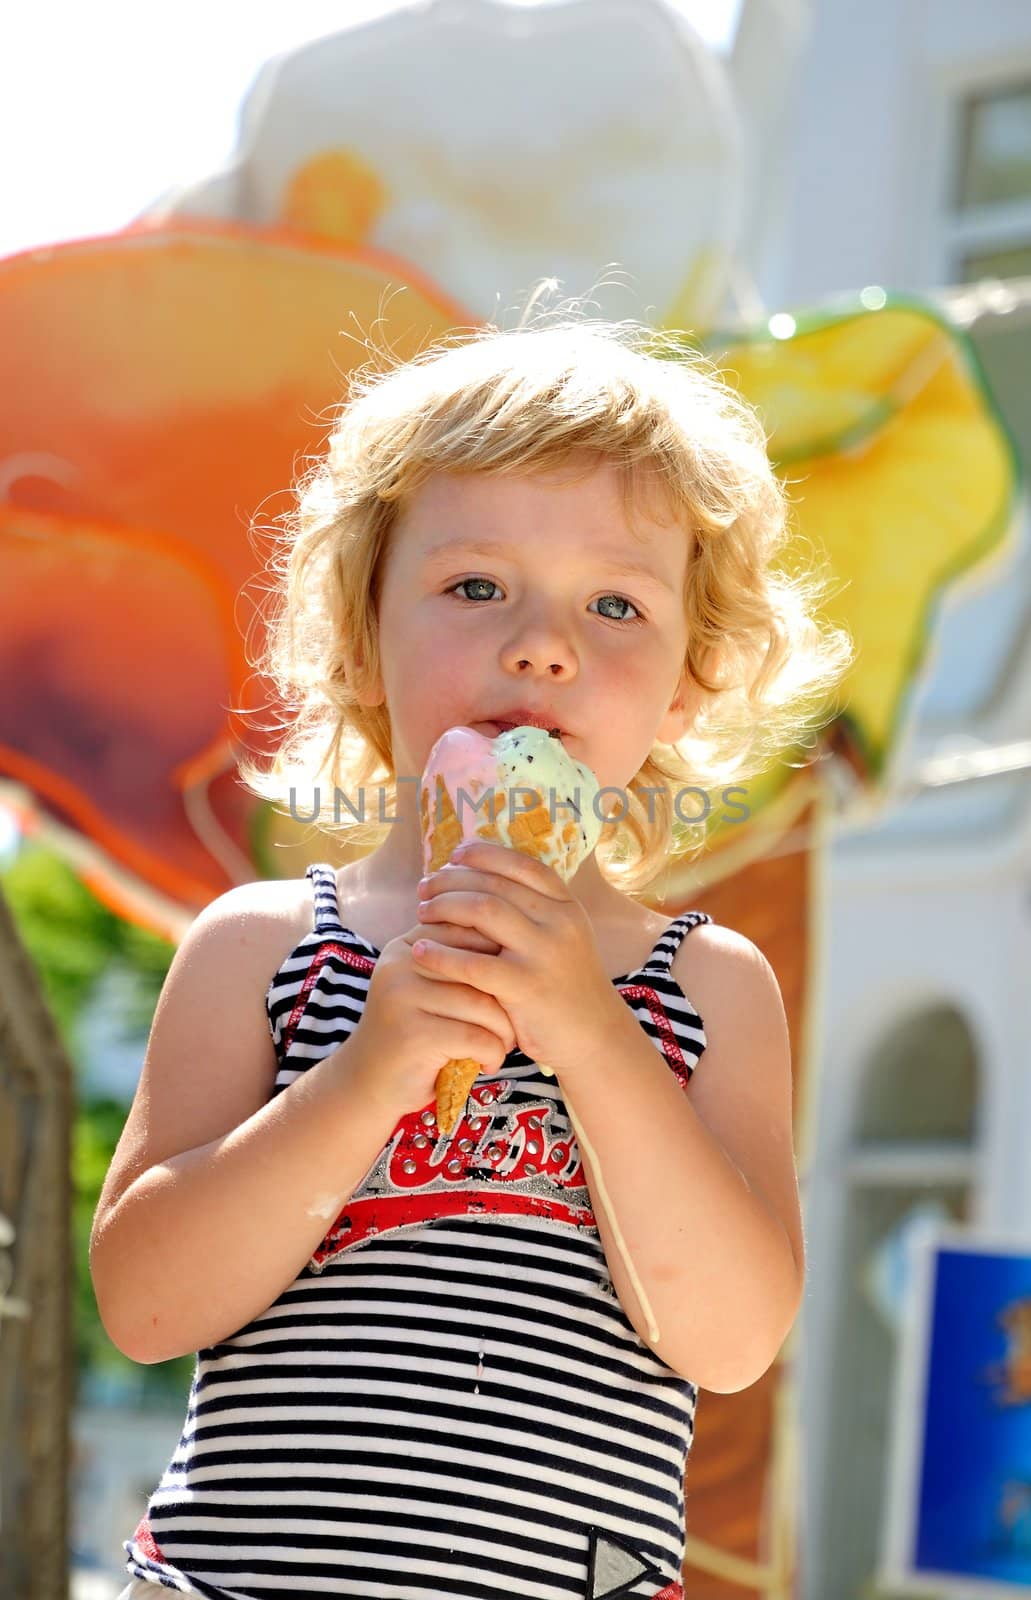 little girl outdoors eating huge ice cream cone
